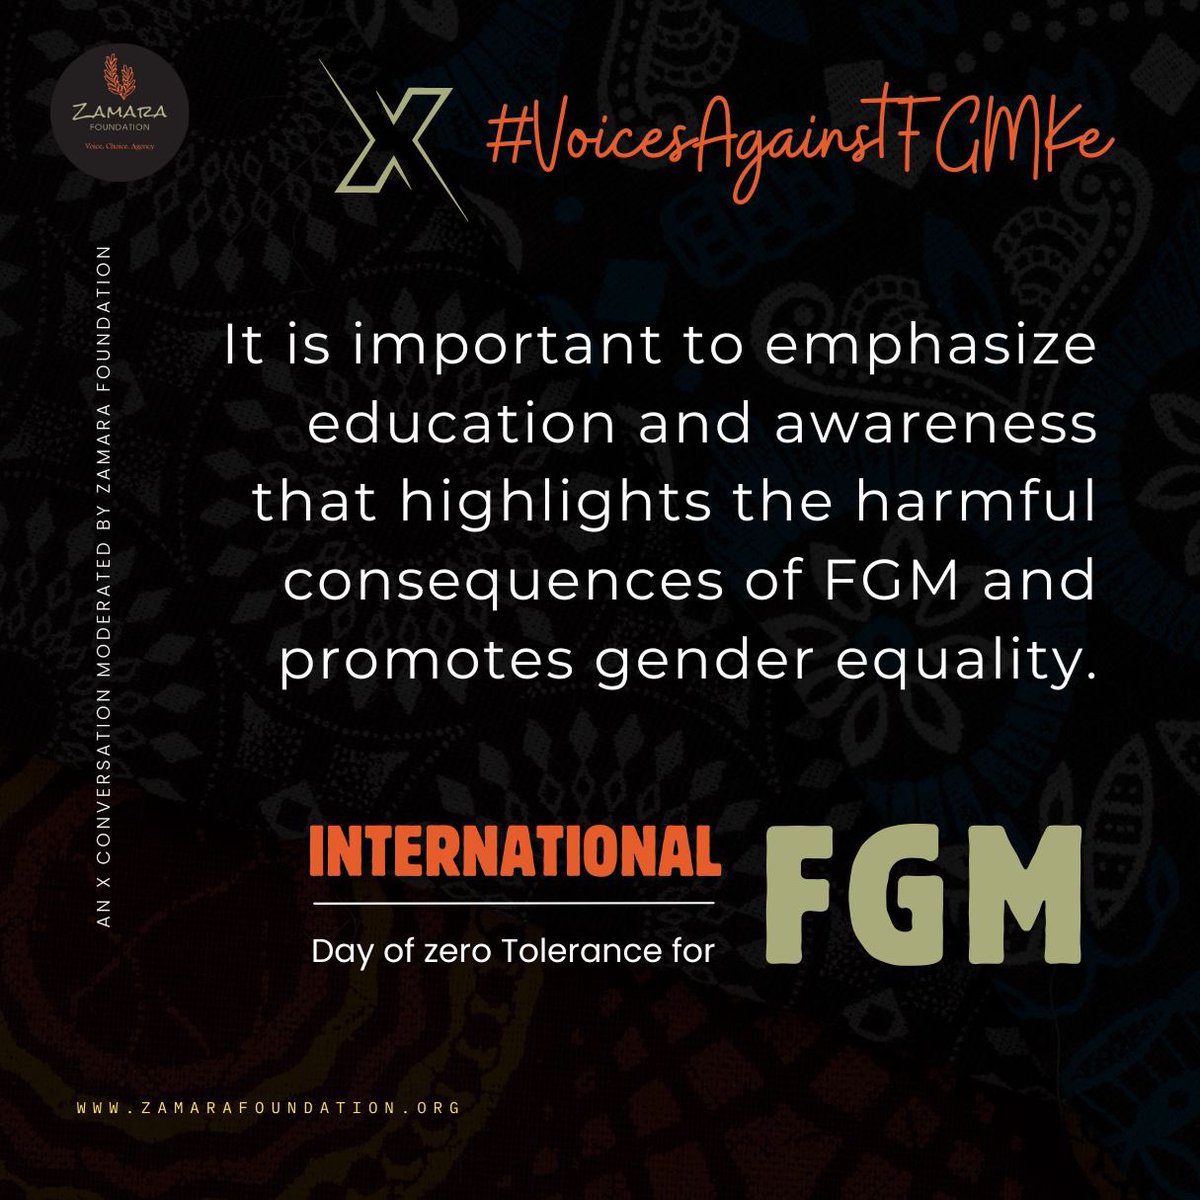 Education and awareness are key in our fight against FGM. Let's spread knowledge about its harmful consequences and advocate for gender equality. Together, we can create a world free from FGM. #VoicesAgainstFGMKe #ZamaraVoices